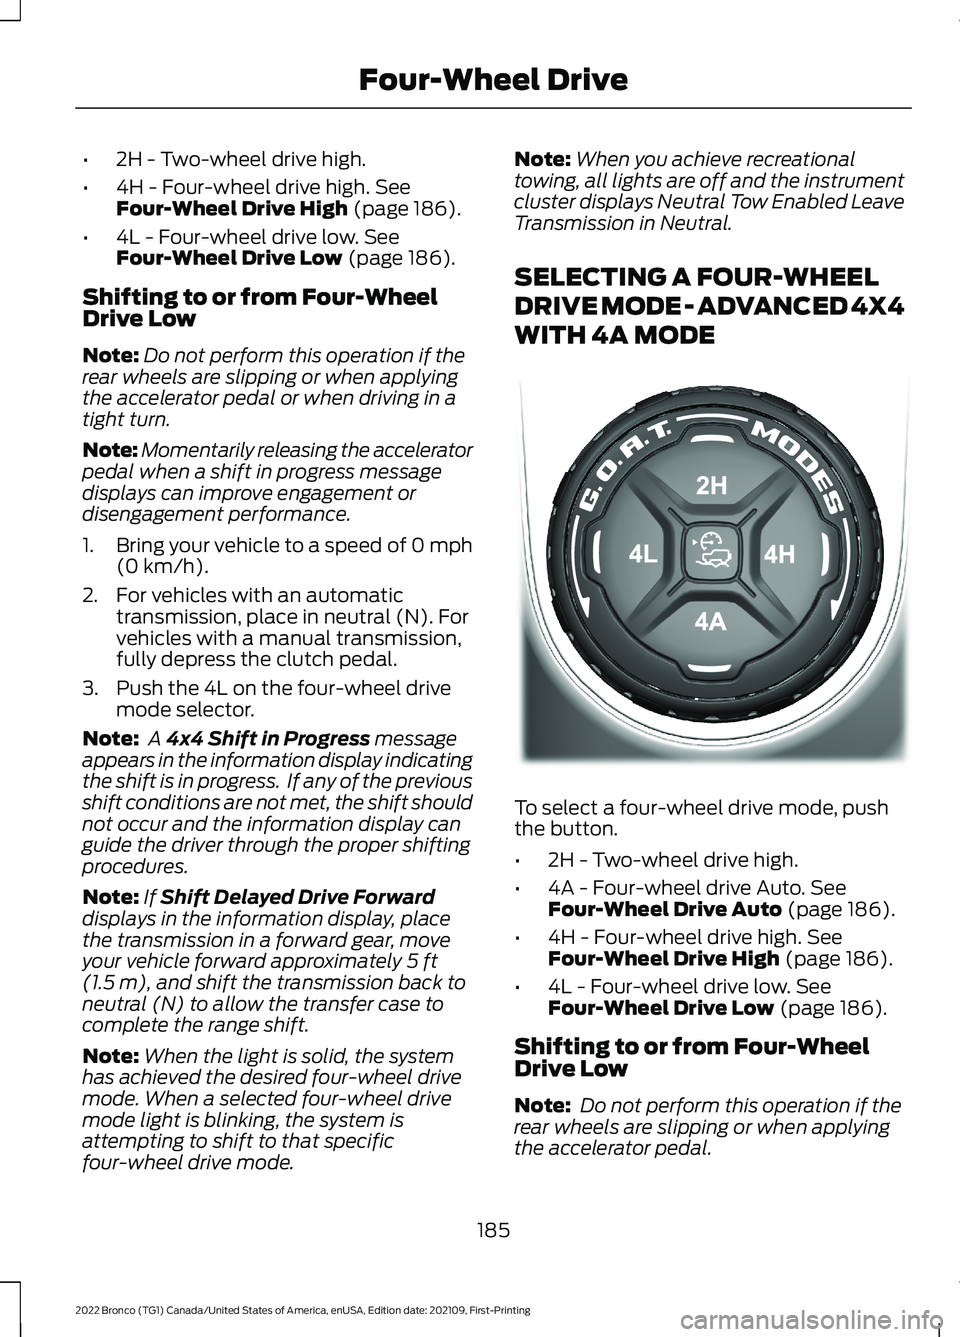 FORD BRONCO 2022  Owners Manual •2H - Two-wheel drive high.
•4H - Four-wheel drive high. SeeFour-Wheel Drive High (page 186).
•4L - Four-wheel drive low. SeeFour-Wheel Drive Low (page 186).
Shifting to or from Four-WheelDrive 